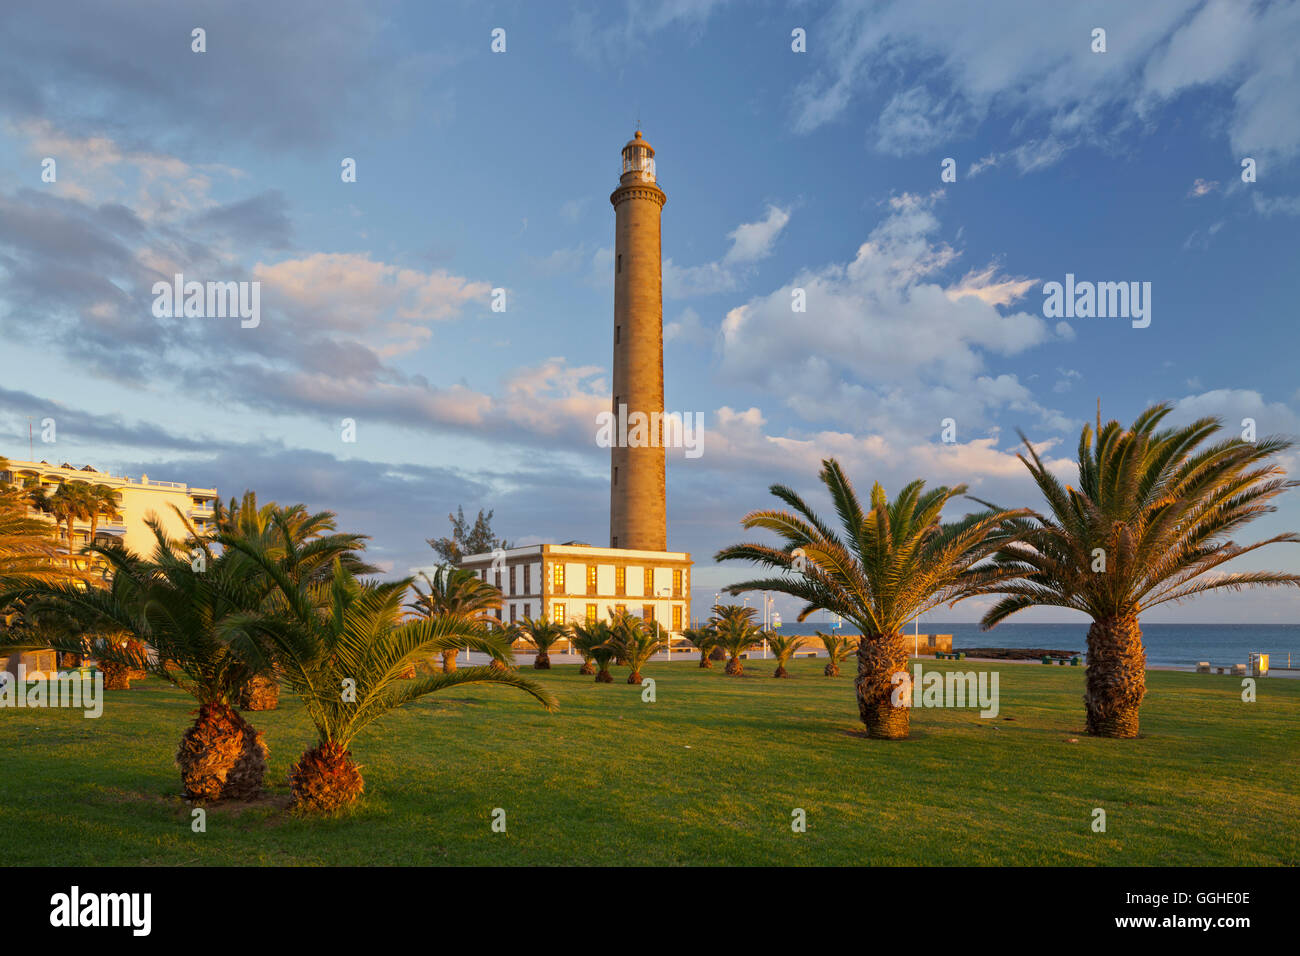 Lighthouse in Maspalomas with palm trees, Gran Canaria, Canary Islands, Spain Stock Photo